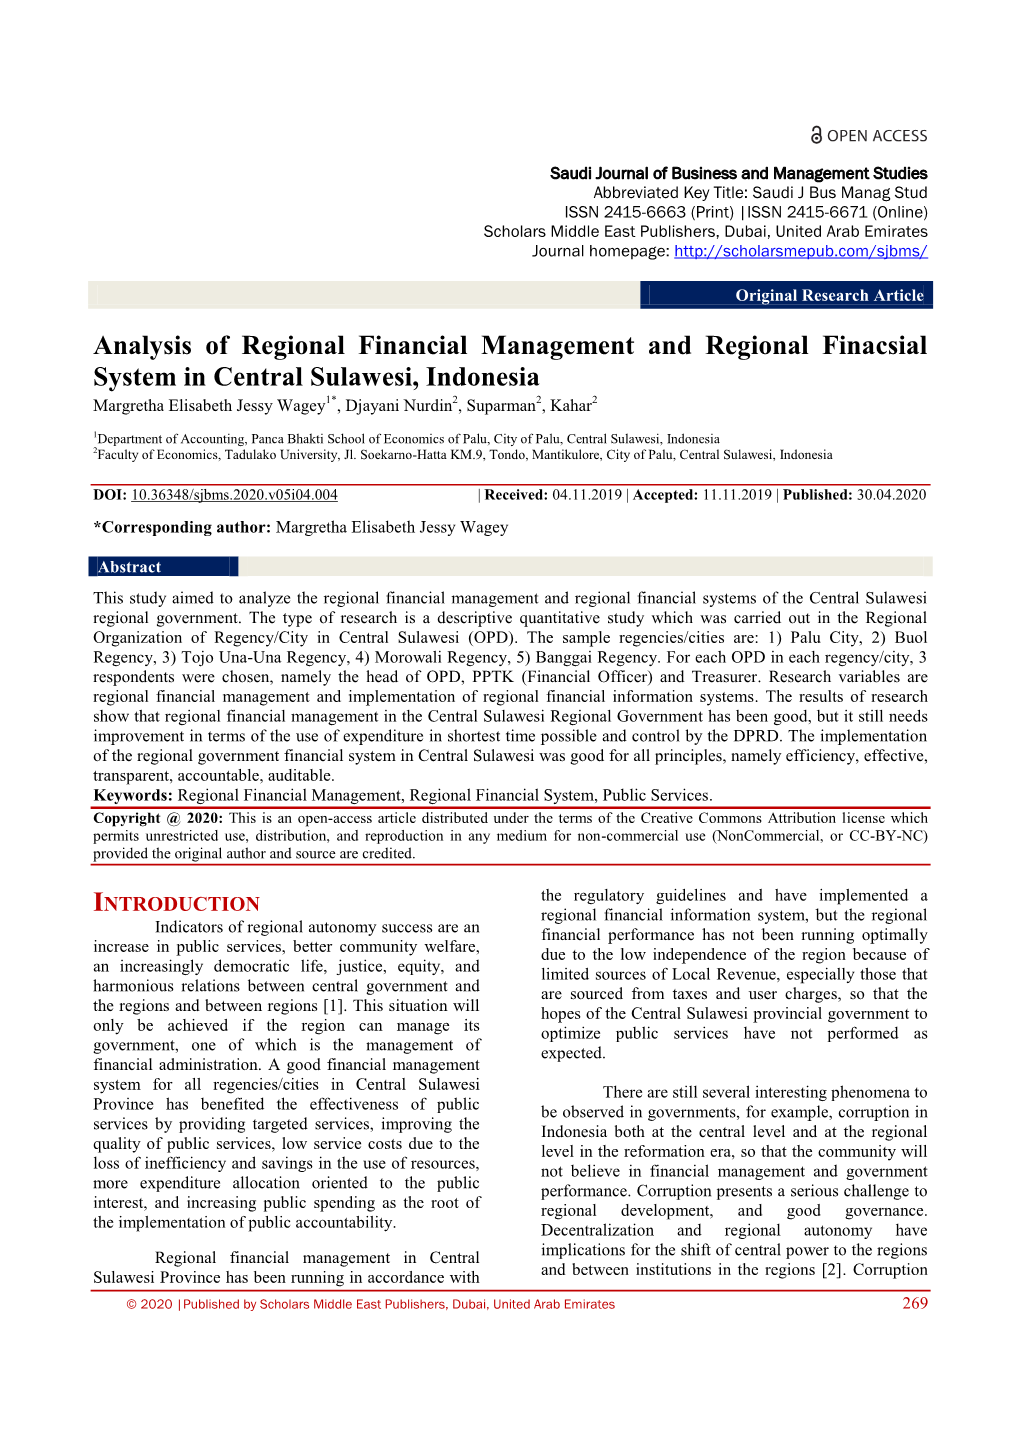 Analysis of Regional Financial Management and Regional Finacsial System in Central Sulawesi, Indonesia